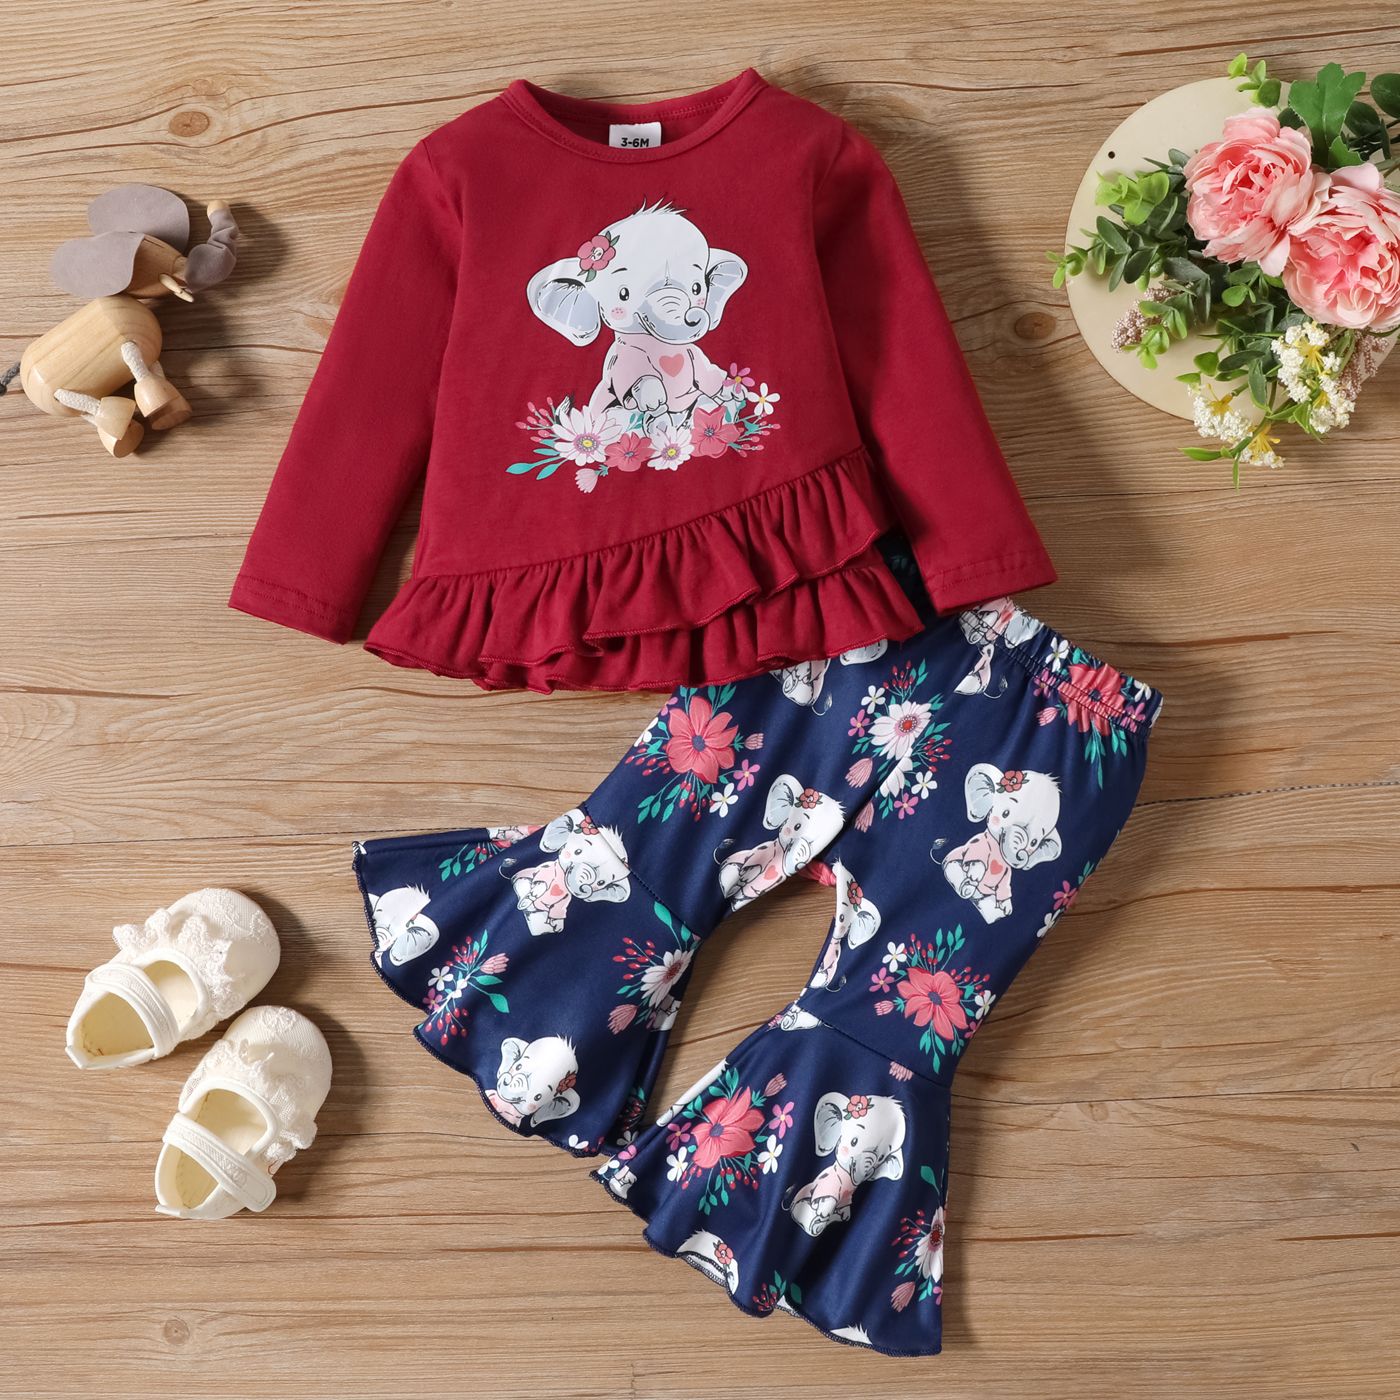 2pcs Baby Girl 95% Cotton Elephant Print Ruffle Long-sleeve Top And Allover Floral & Elephant Print Flared Pants Set